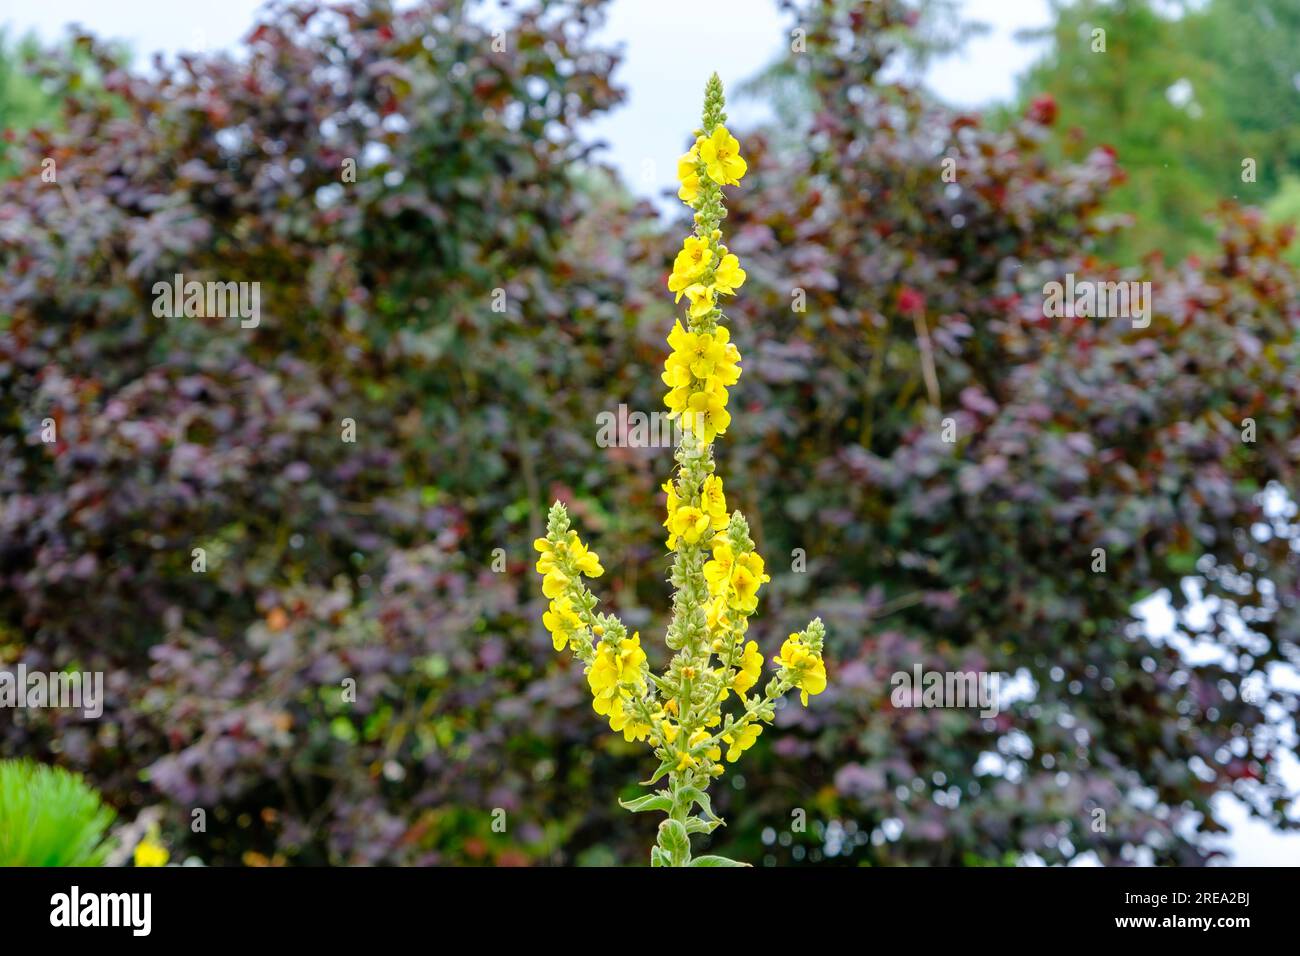 Yellow flowers of mullein, Verbascum densiflorum Bertol. in the family: Scrophulariaceae. Health drugs, medicinal plant. Stock Photo